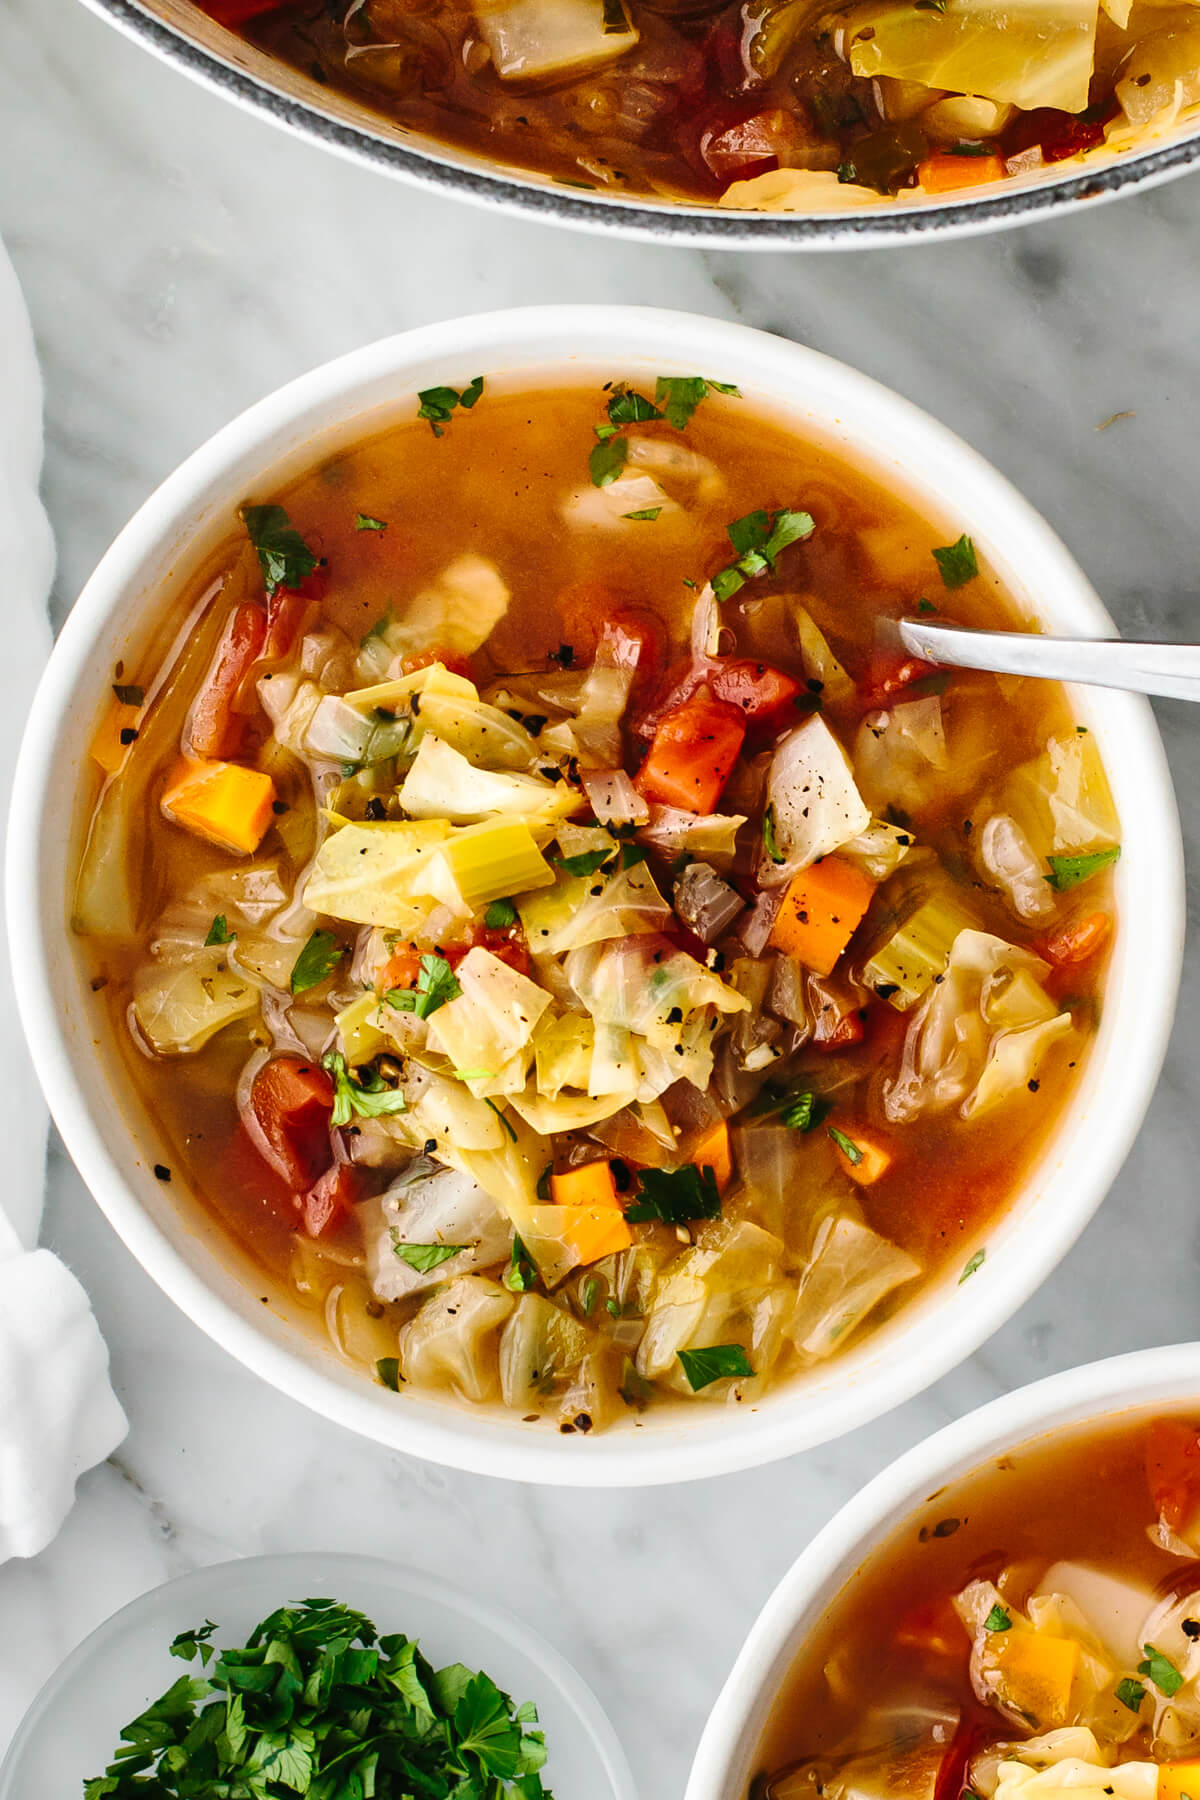 Cabbage soup in a bowl on a table.